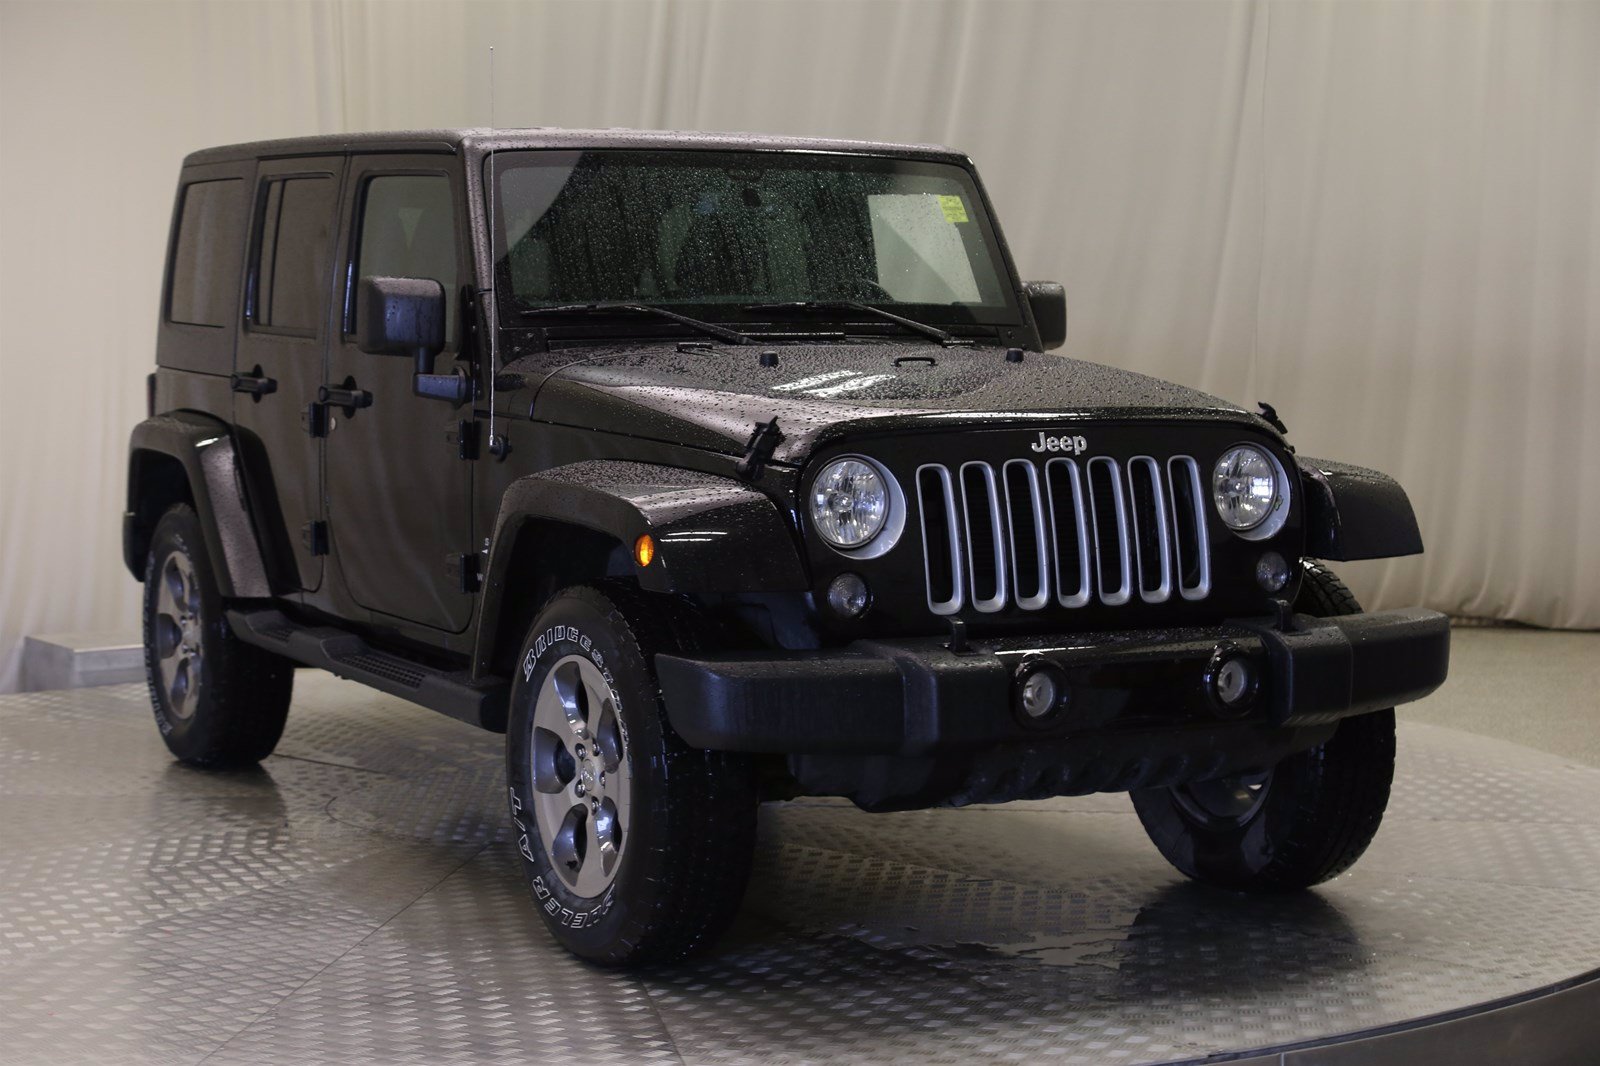 Certified PreOwned 2018 Jeep Wrangler JK Unlimited Sahara